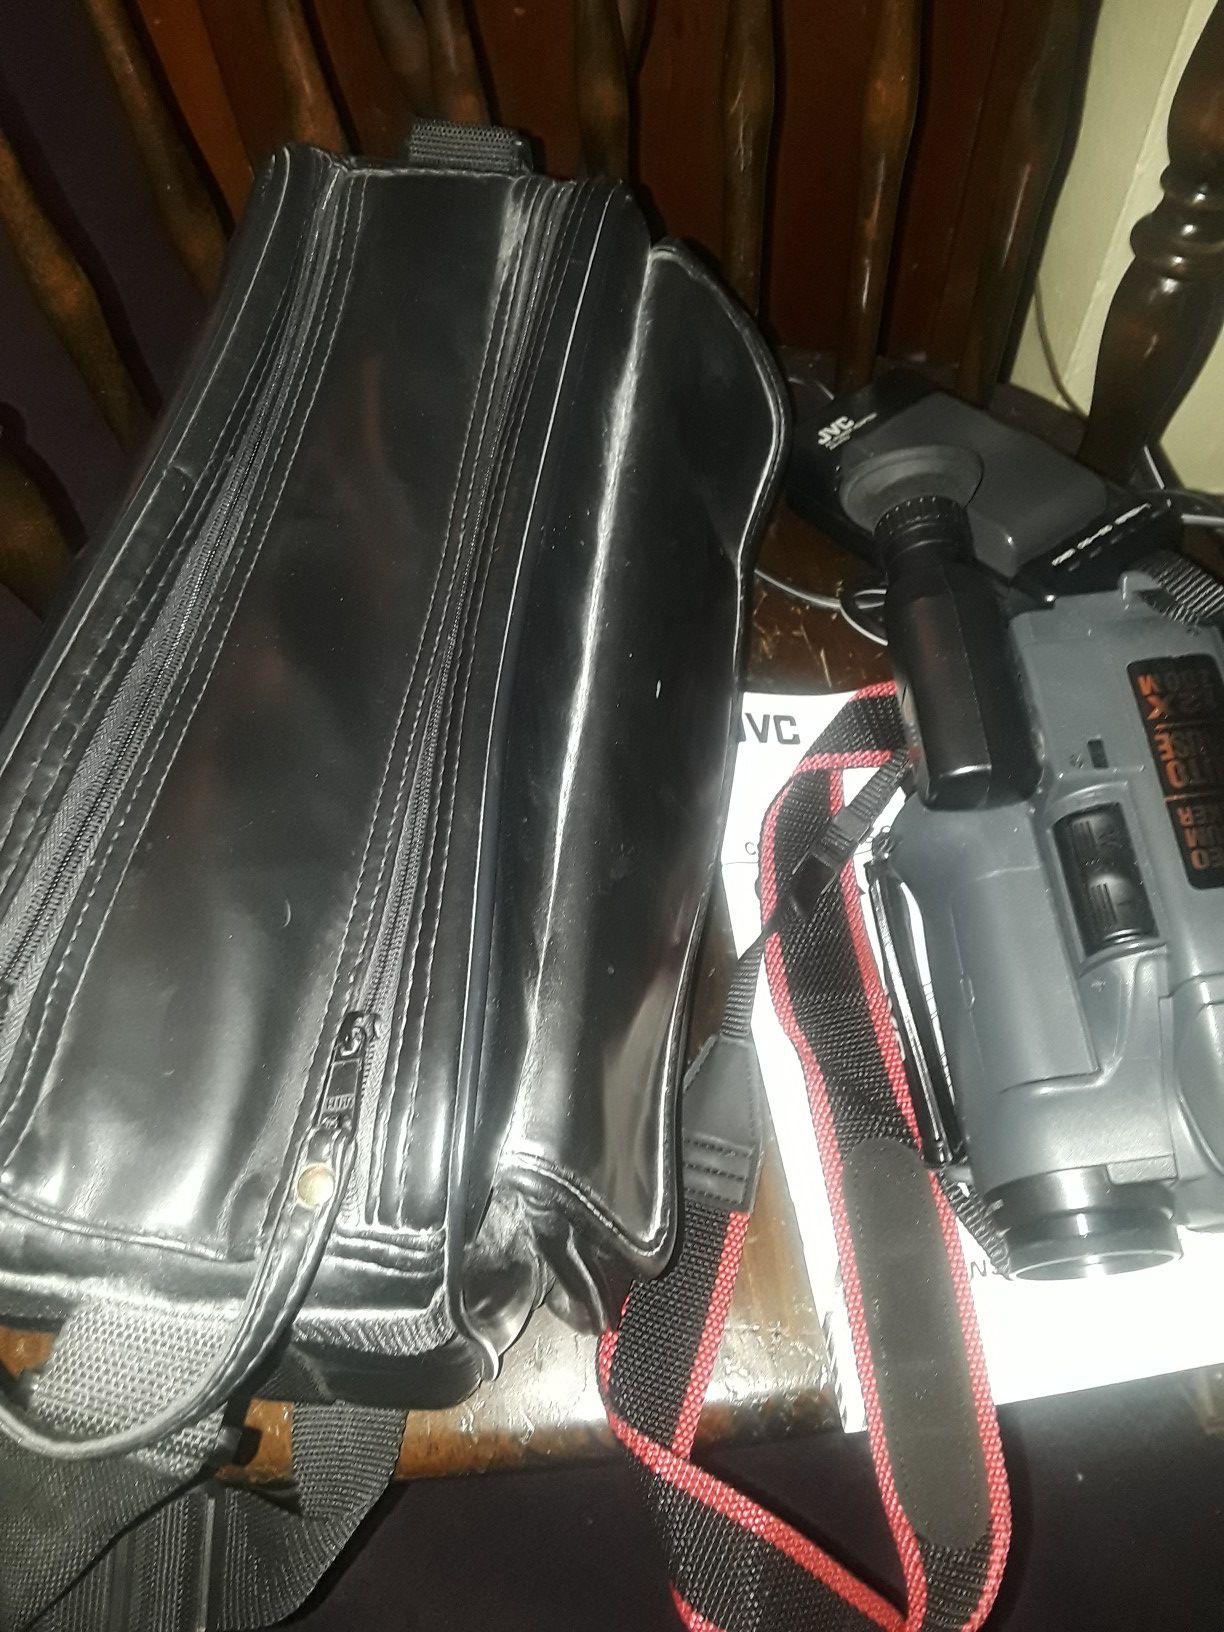 Vintage JVC Camcorder, Accessories/ Leather Bag And Manual